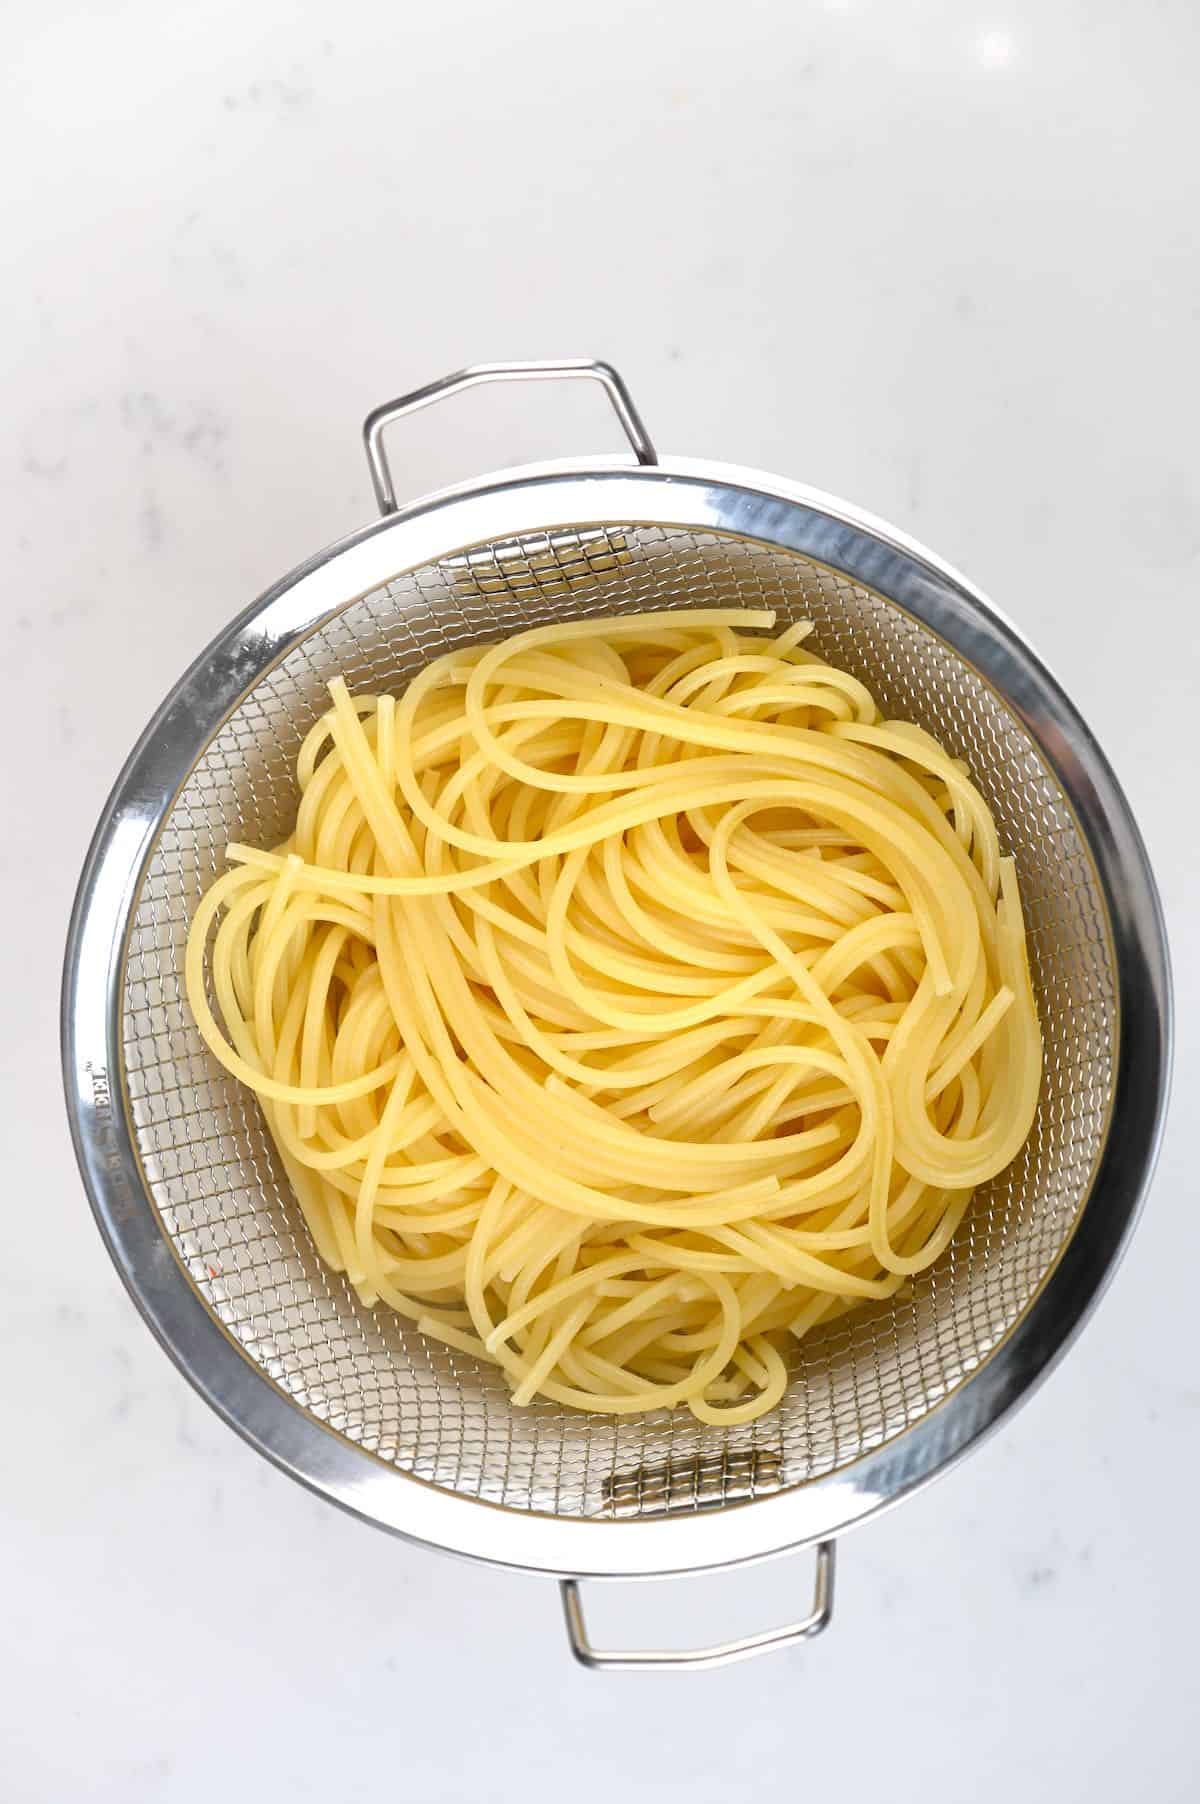 Drained pasta in a colander